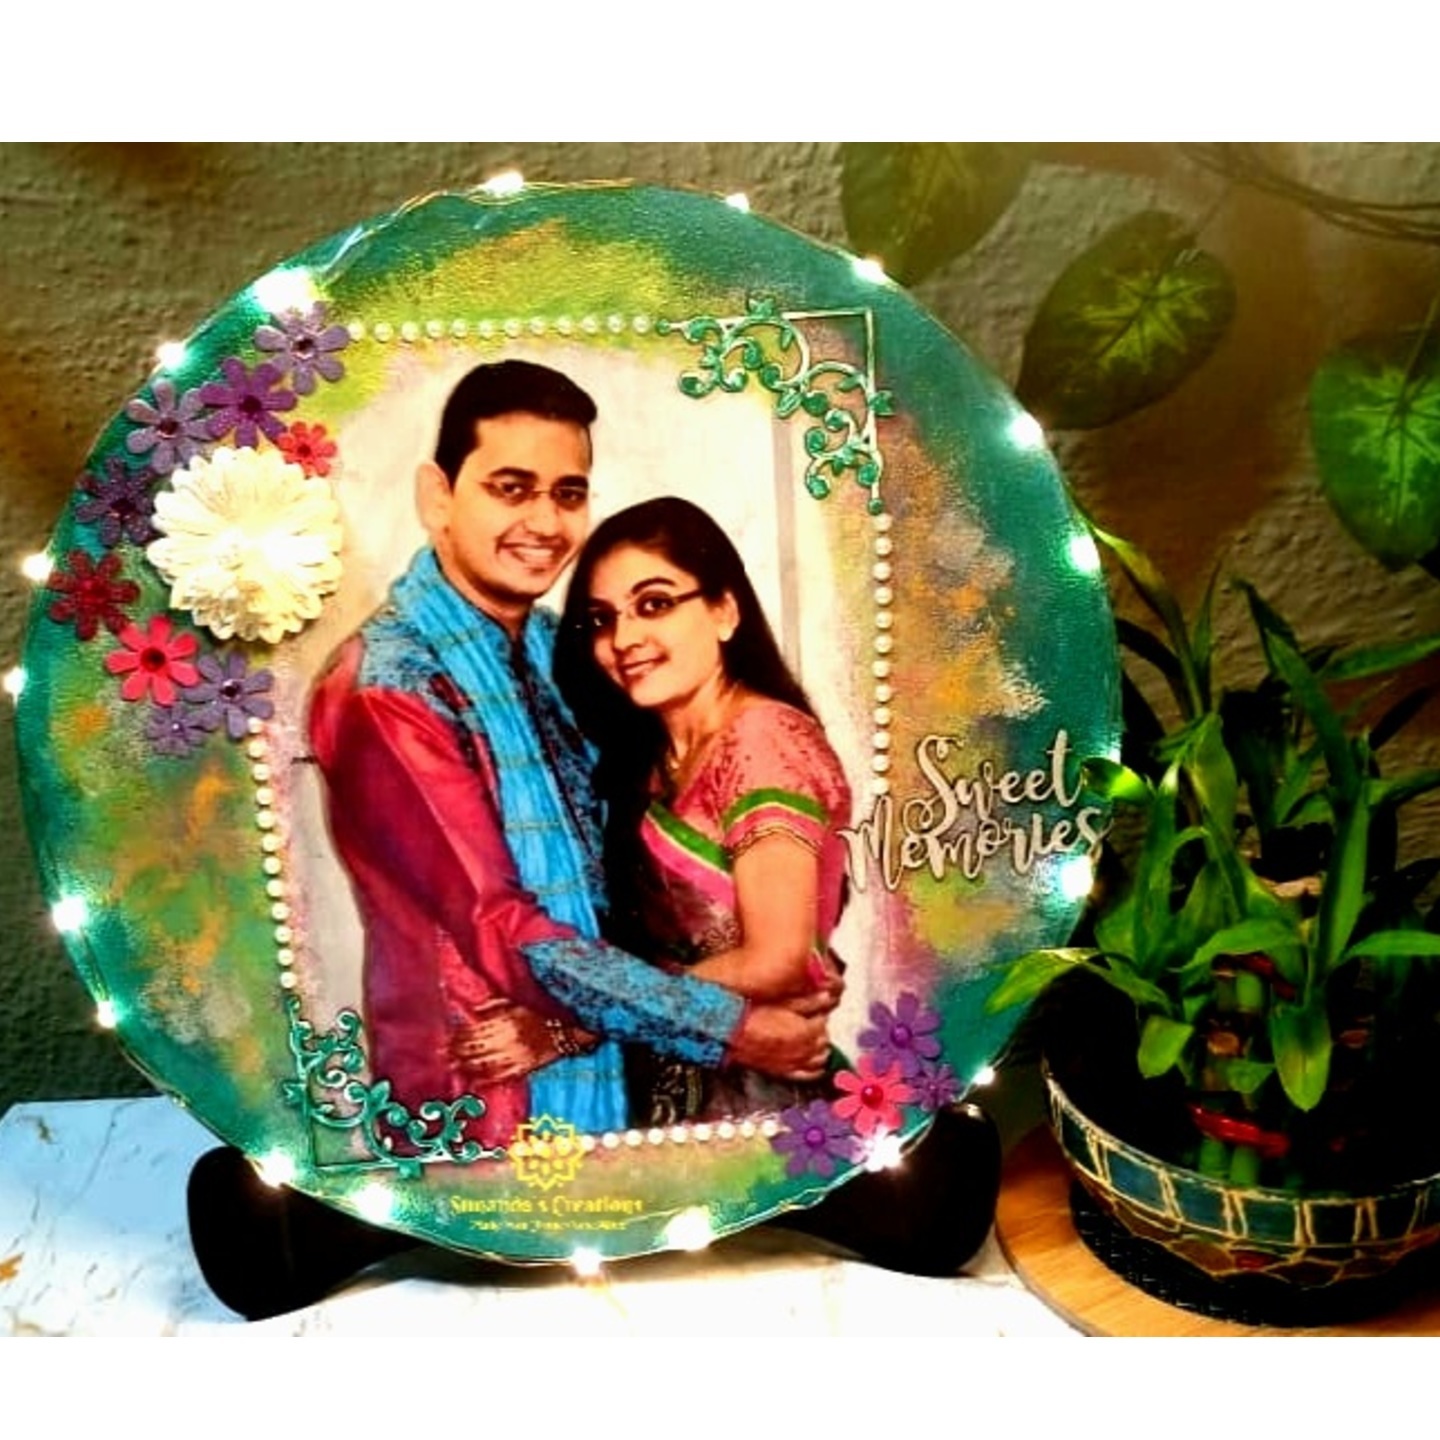 PlanterPersonalized Photo Plate Mixed media Hand painted Light & wooden stand included